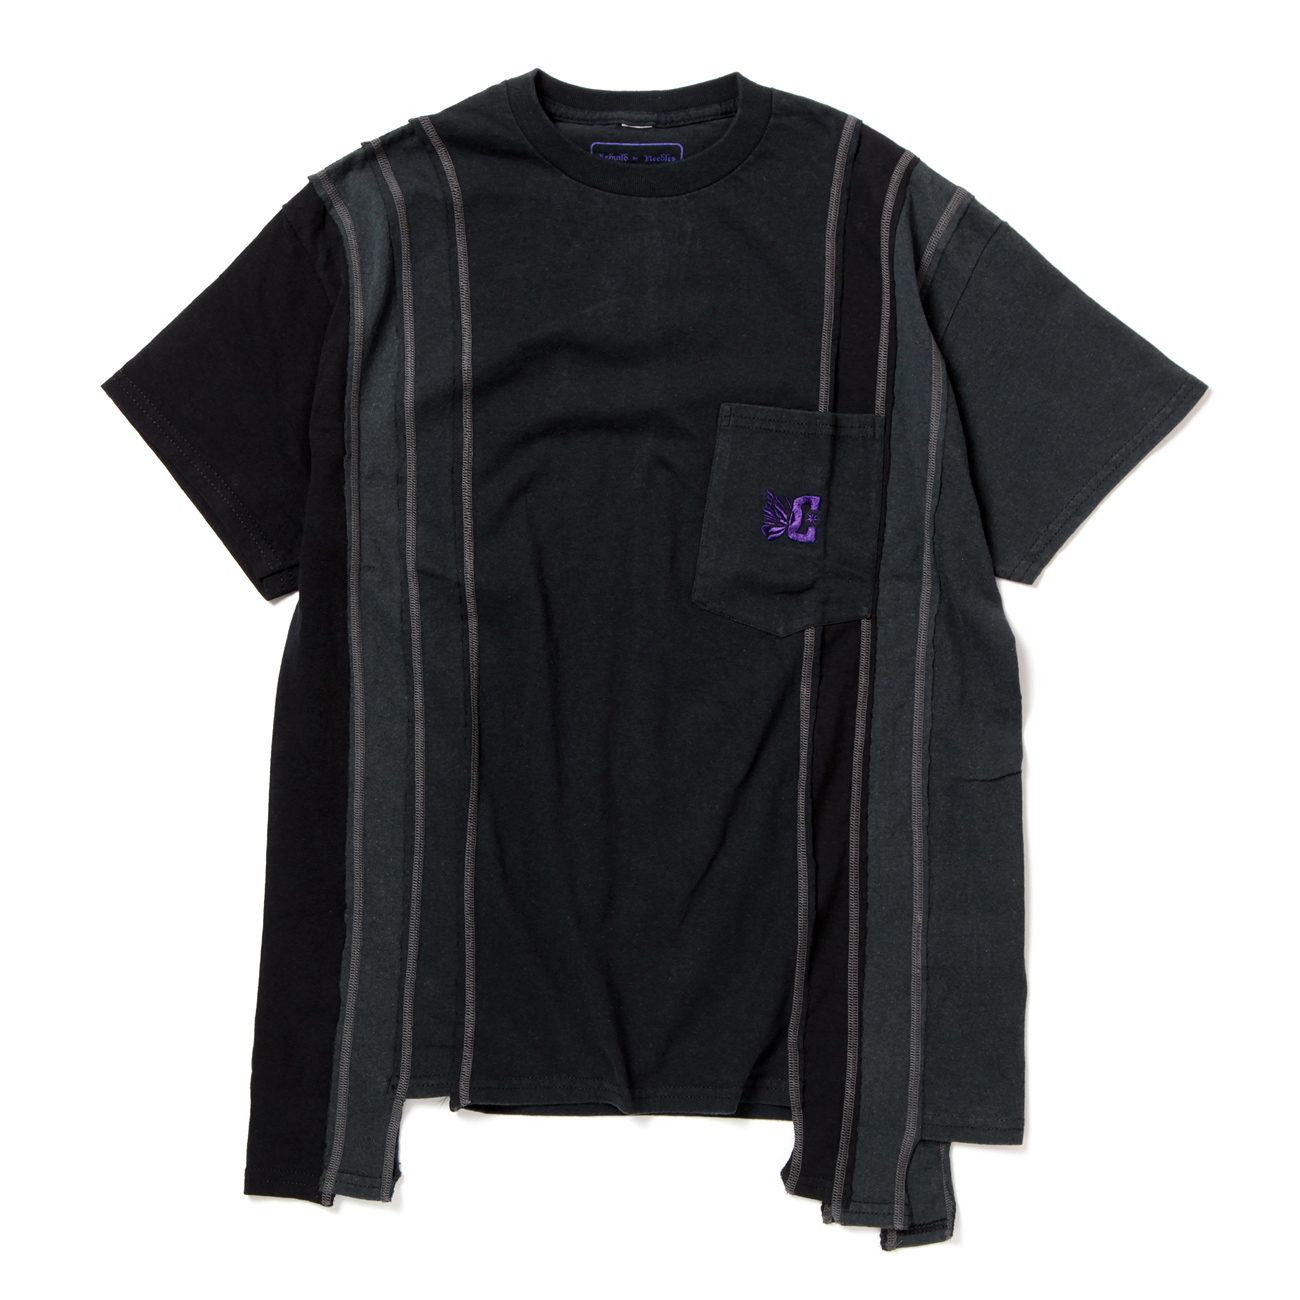 Needles × DC SHOES 7 Cuts S/S Tee - Solid / Fade - Black